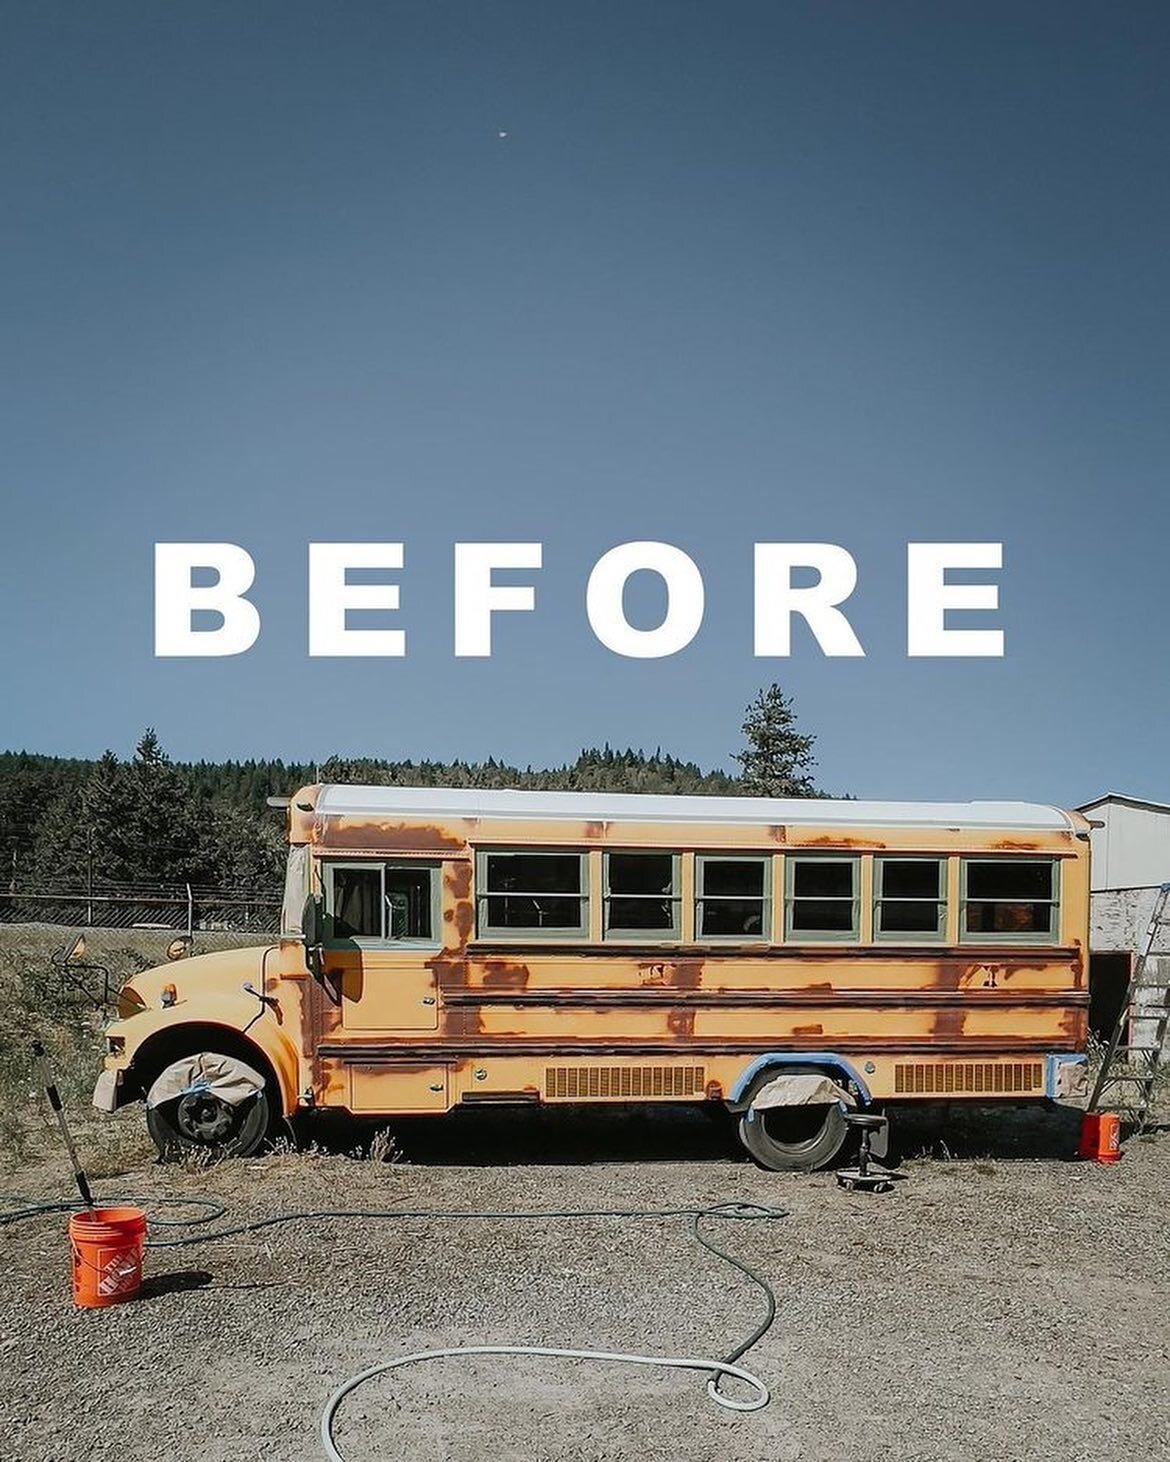 🚌 SHRED SLED STORYTIME 🚌

Our iconic bus wasn&rsquo;t always so bright and colorful.  We rescued the Shred Sled back in 2021, ready to transform the retired schoolbus into something awesome 🌈🎨🛹

At first, the bus was painted a stark polar bear w